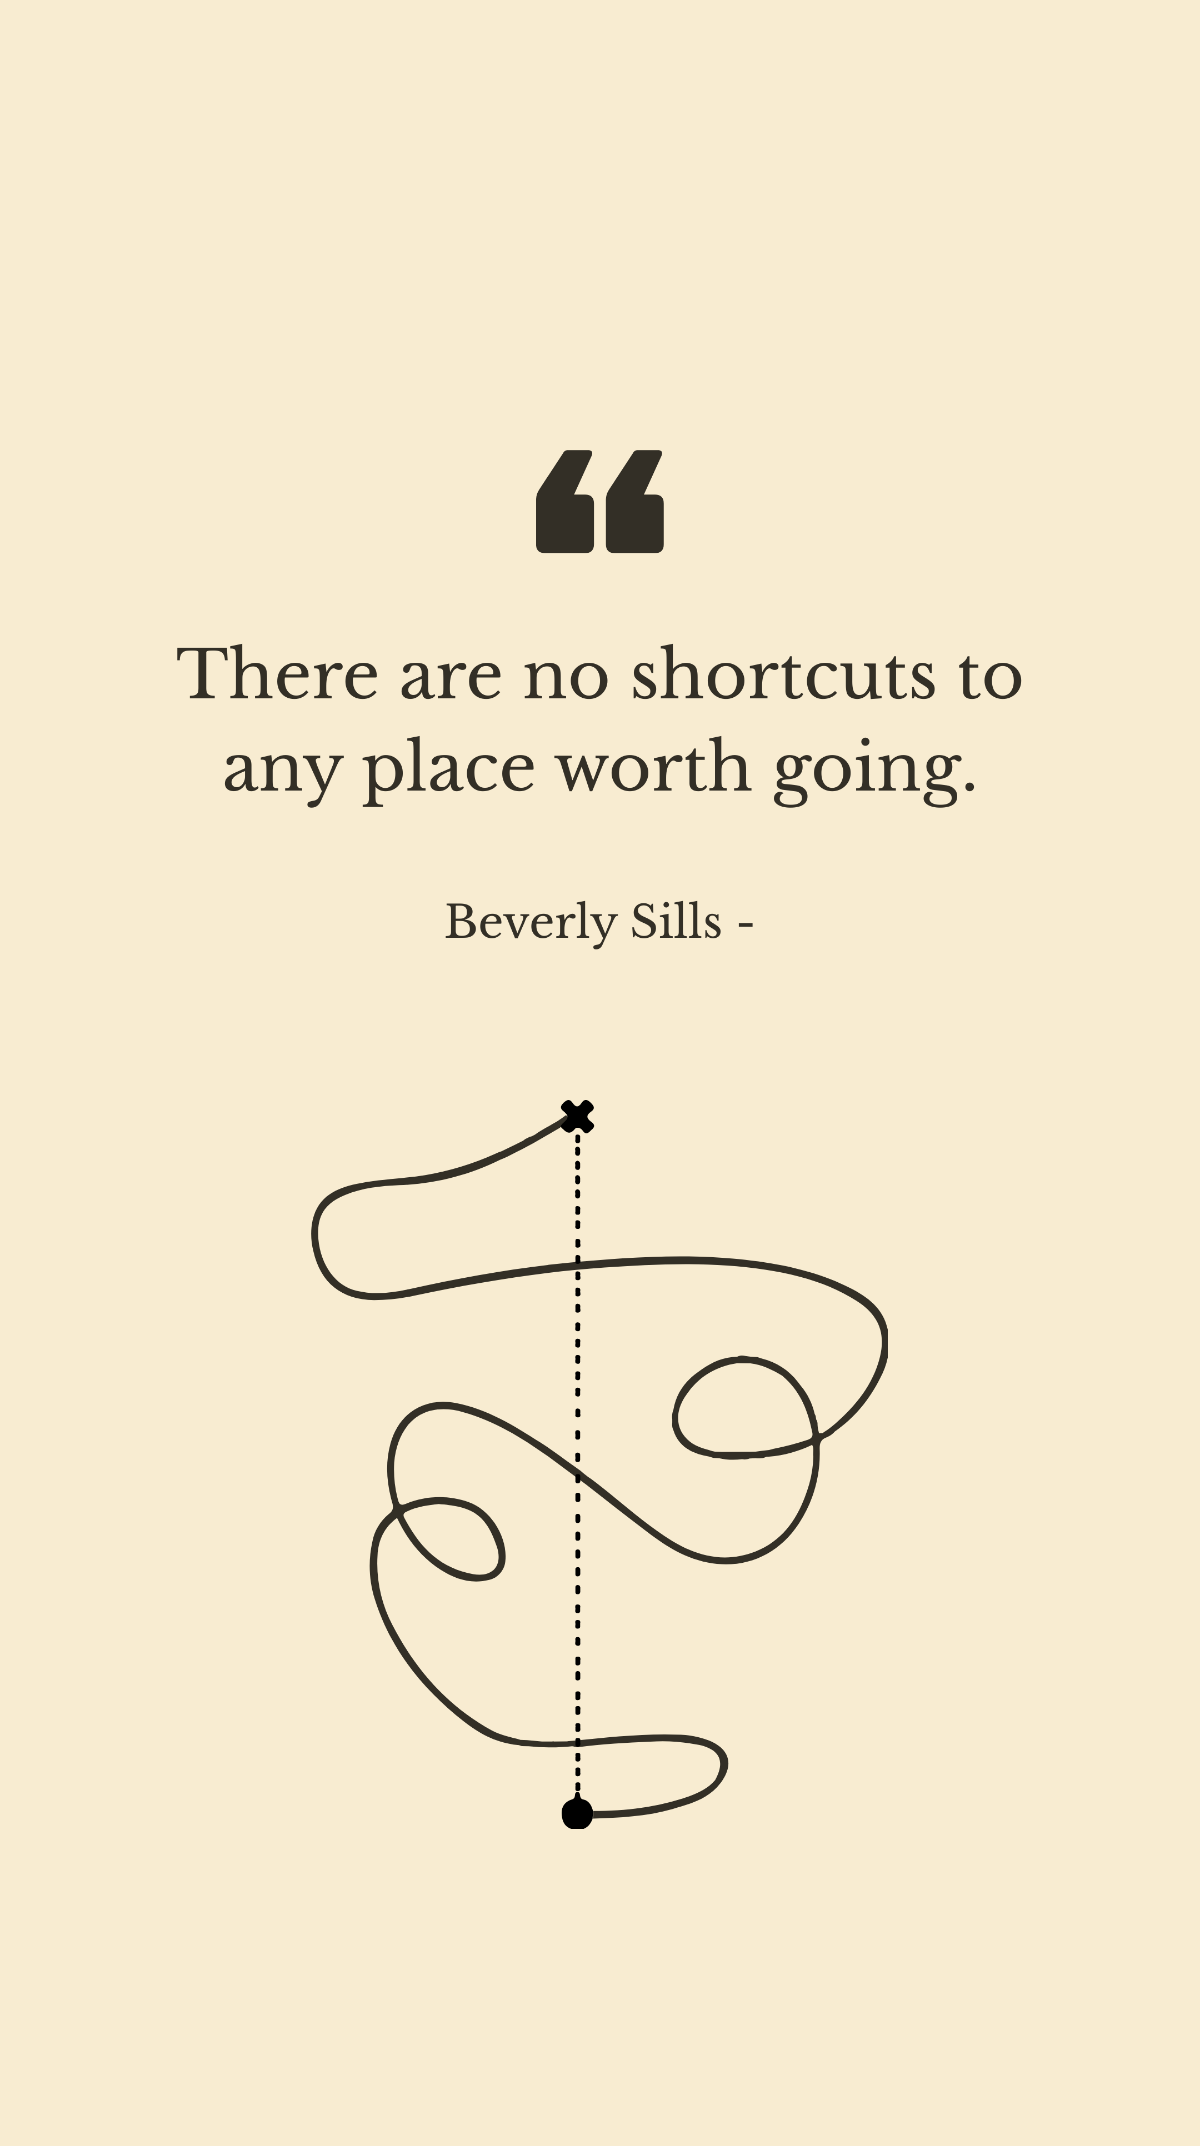 Free Beverly Sills - There are no shortcuts to any place worth going. Template